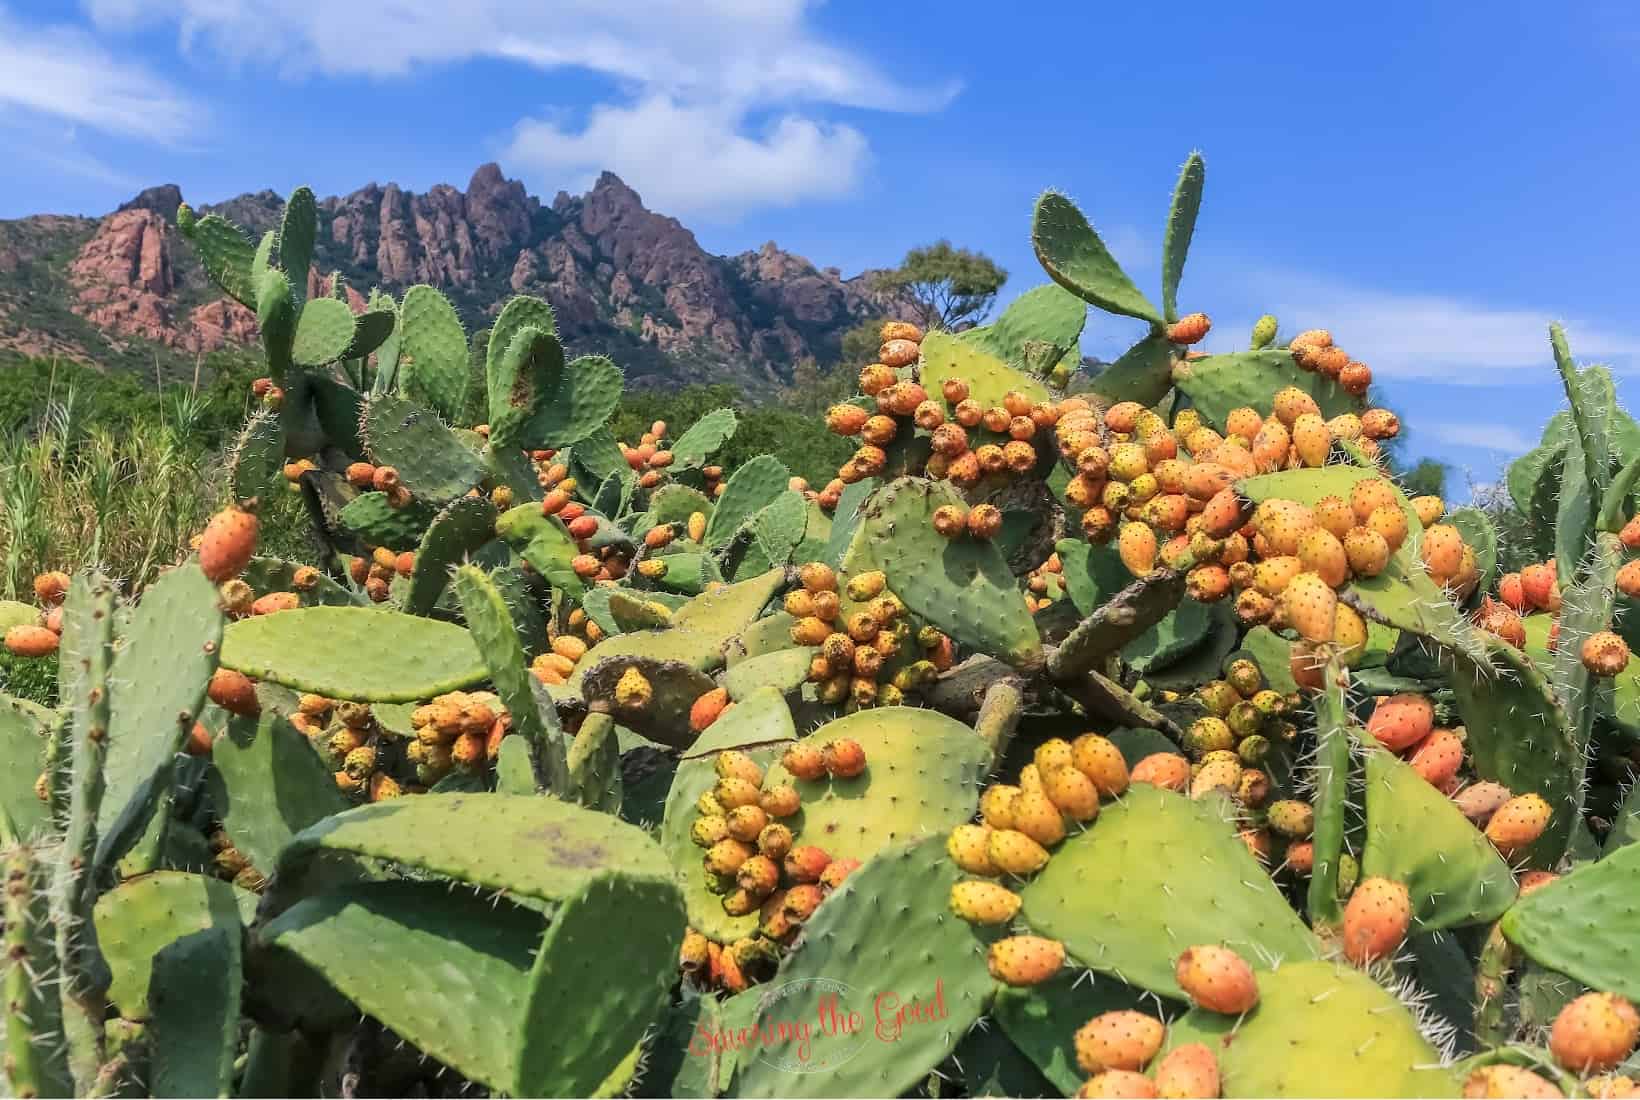 A cactus plant with berries and mountains in the background. xerophyte